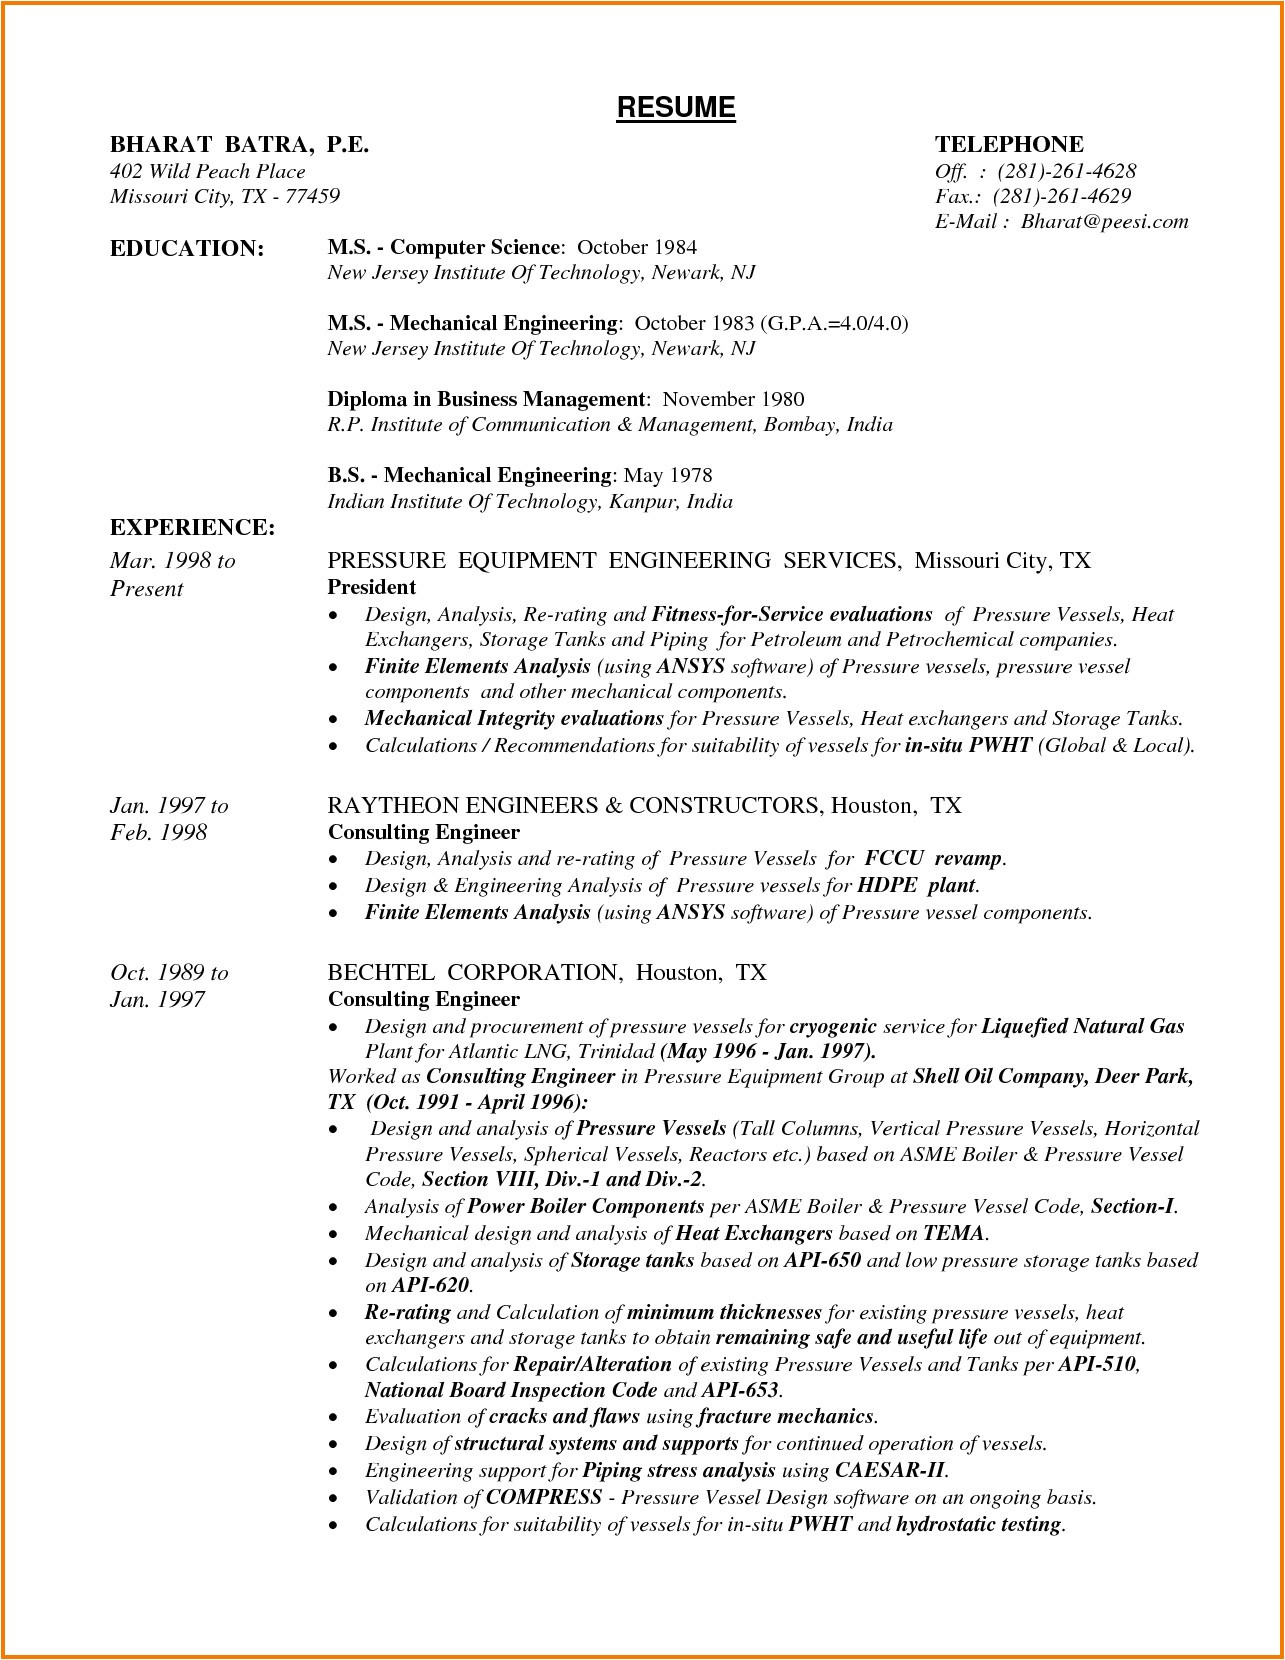 Sample Resume for Experienced Production Engineer Pdf Sample Resume for Mechanical Design Engineer Pdf